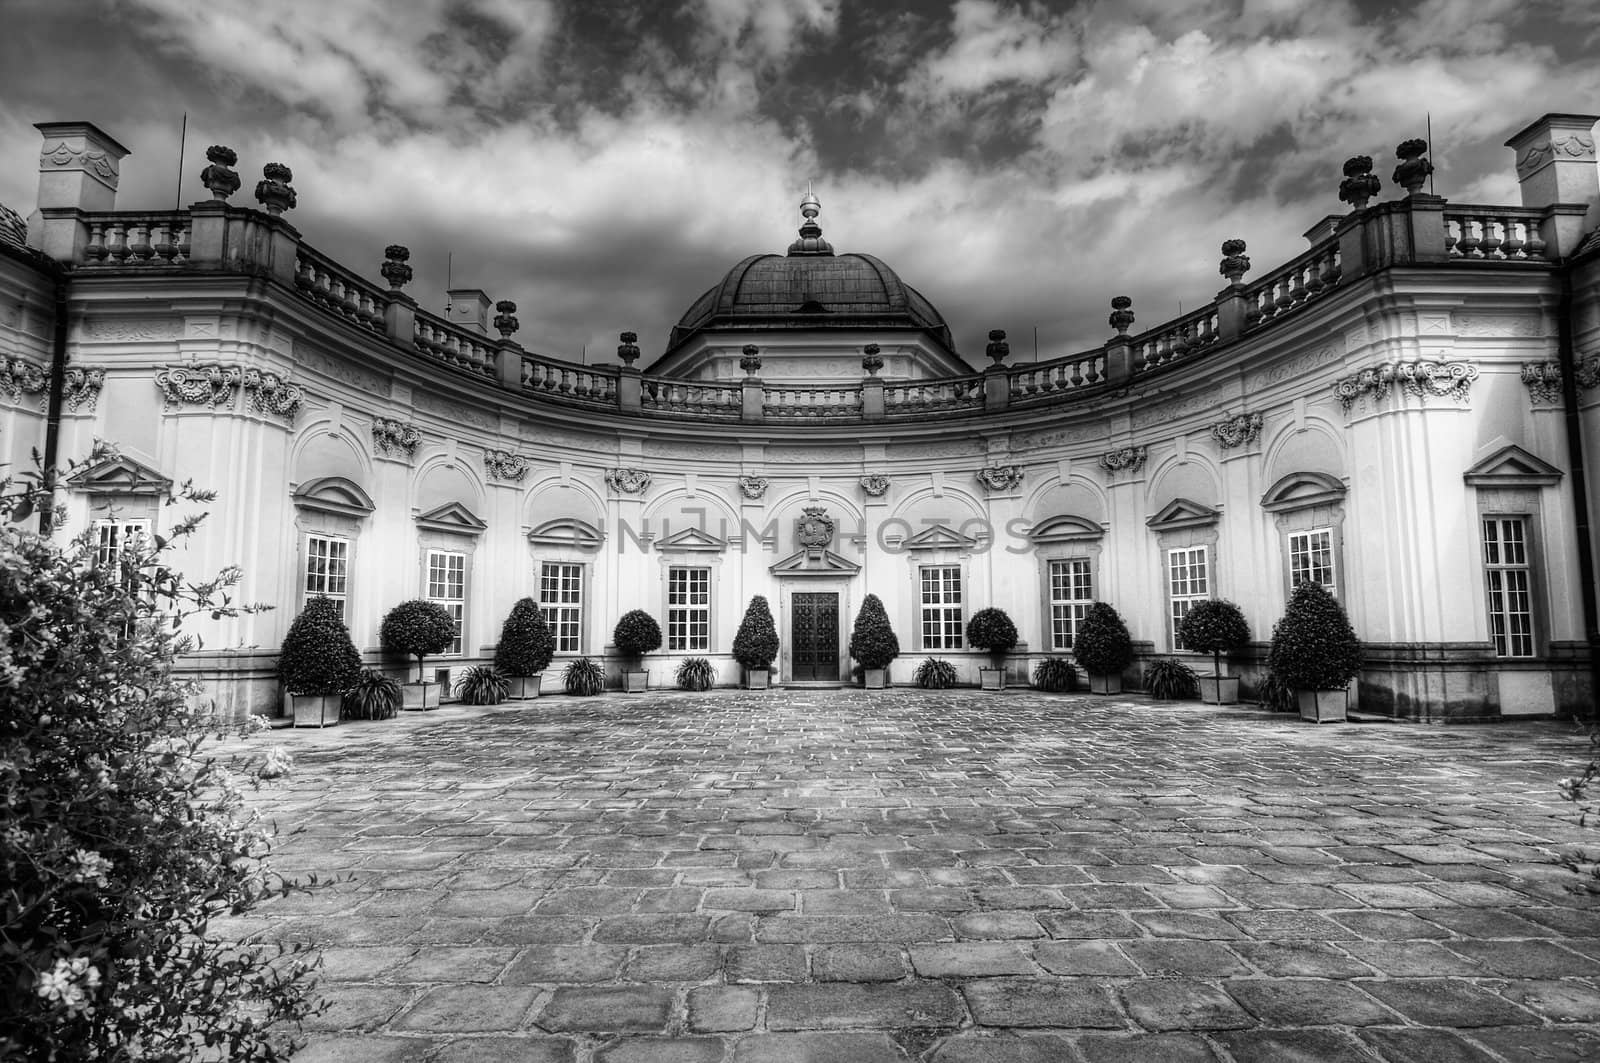 Buchlovice castle was built in style of Italian baroque at 1707, probably by Domenico Martinelli. Buchlovice castle is situated about 10 km to the west of Uherske Hradiste in south-east Moravia, Czech Republic.